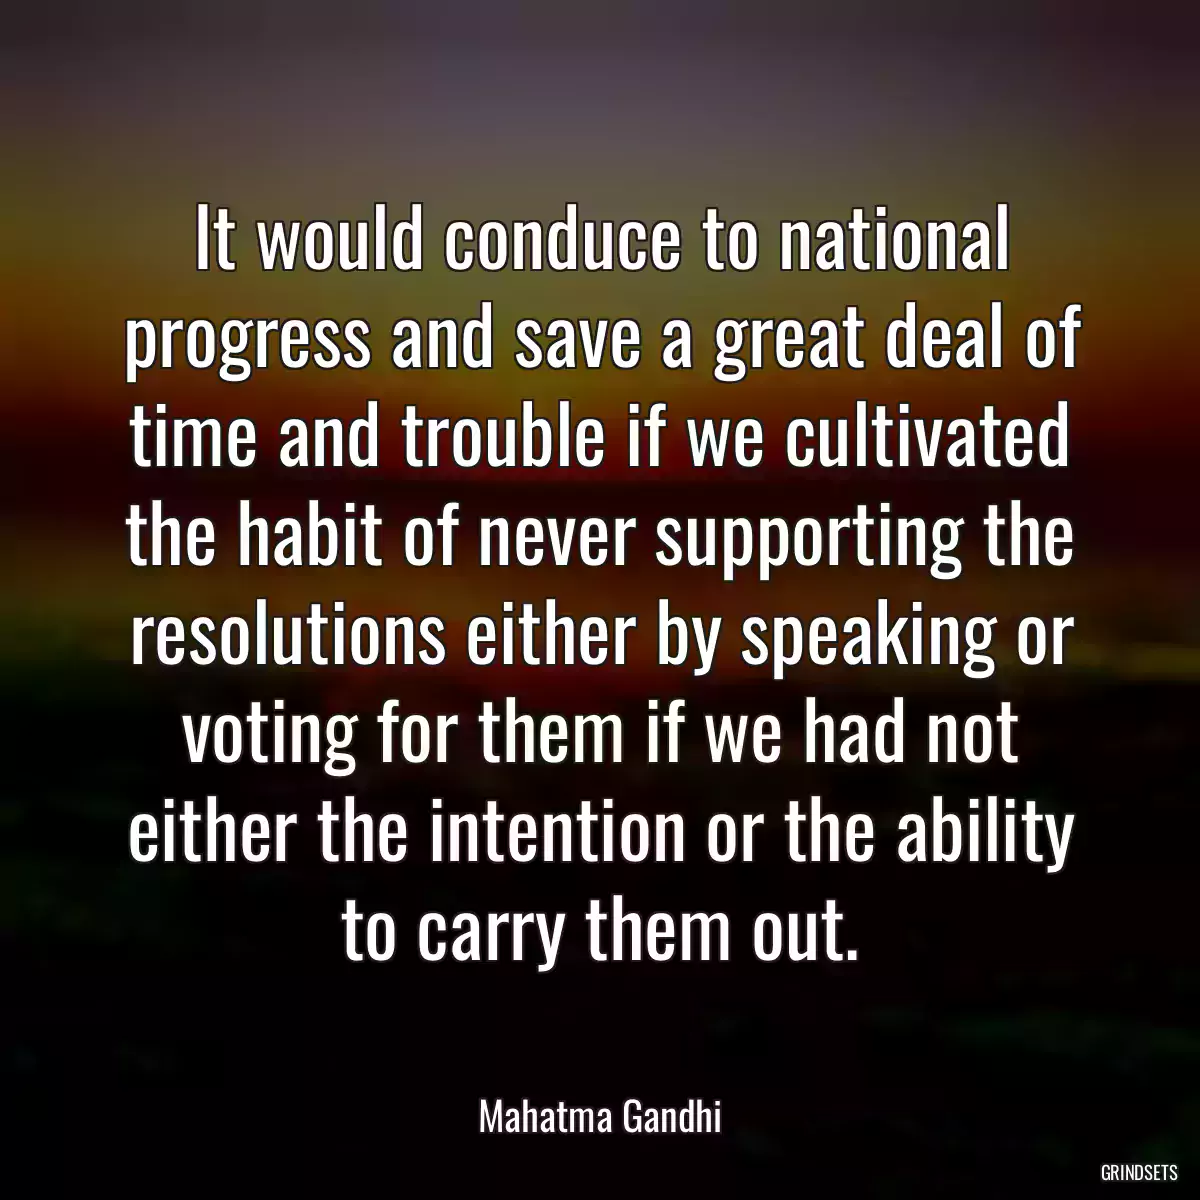 It would conduce to national progress and save a great deal of time and trouble if we cultivated the habit of never supporting the resolutions either by speaking or voting for them if we had not either the intention or the ability to carry them out.